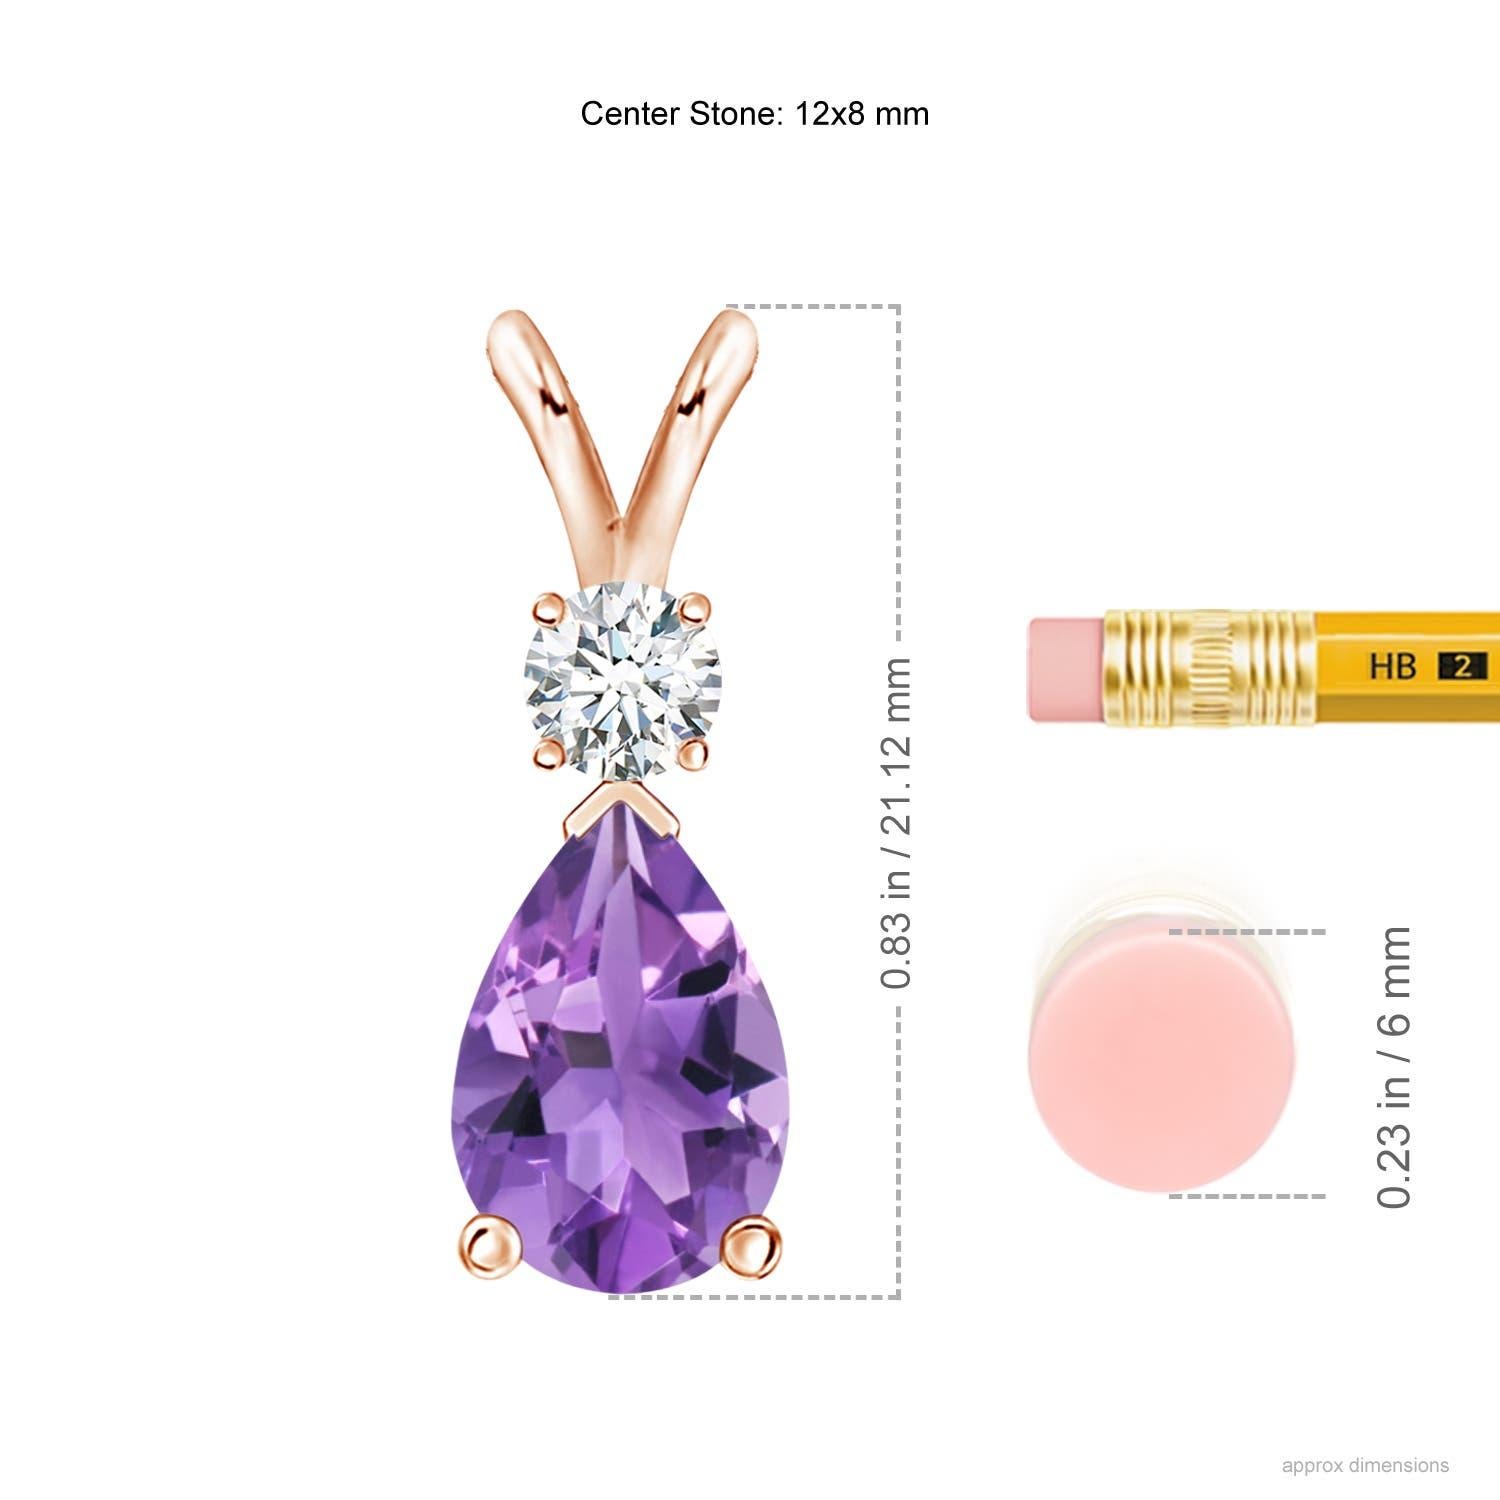 A pear-shaped deep purple amethyst is secured in a prong setting and embellished with a diamond accent on the top. Simple yet stunning, this teardrop amethyst pendant with V bale is sculpted in 14k rose gold.
Amethyst is the Birthstone for February